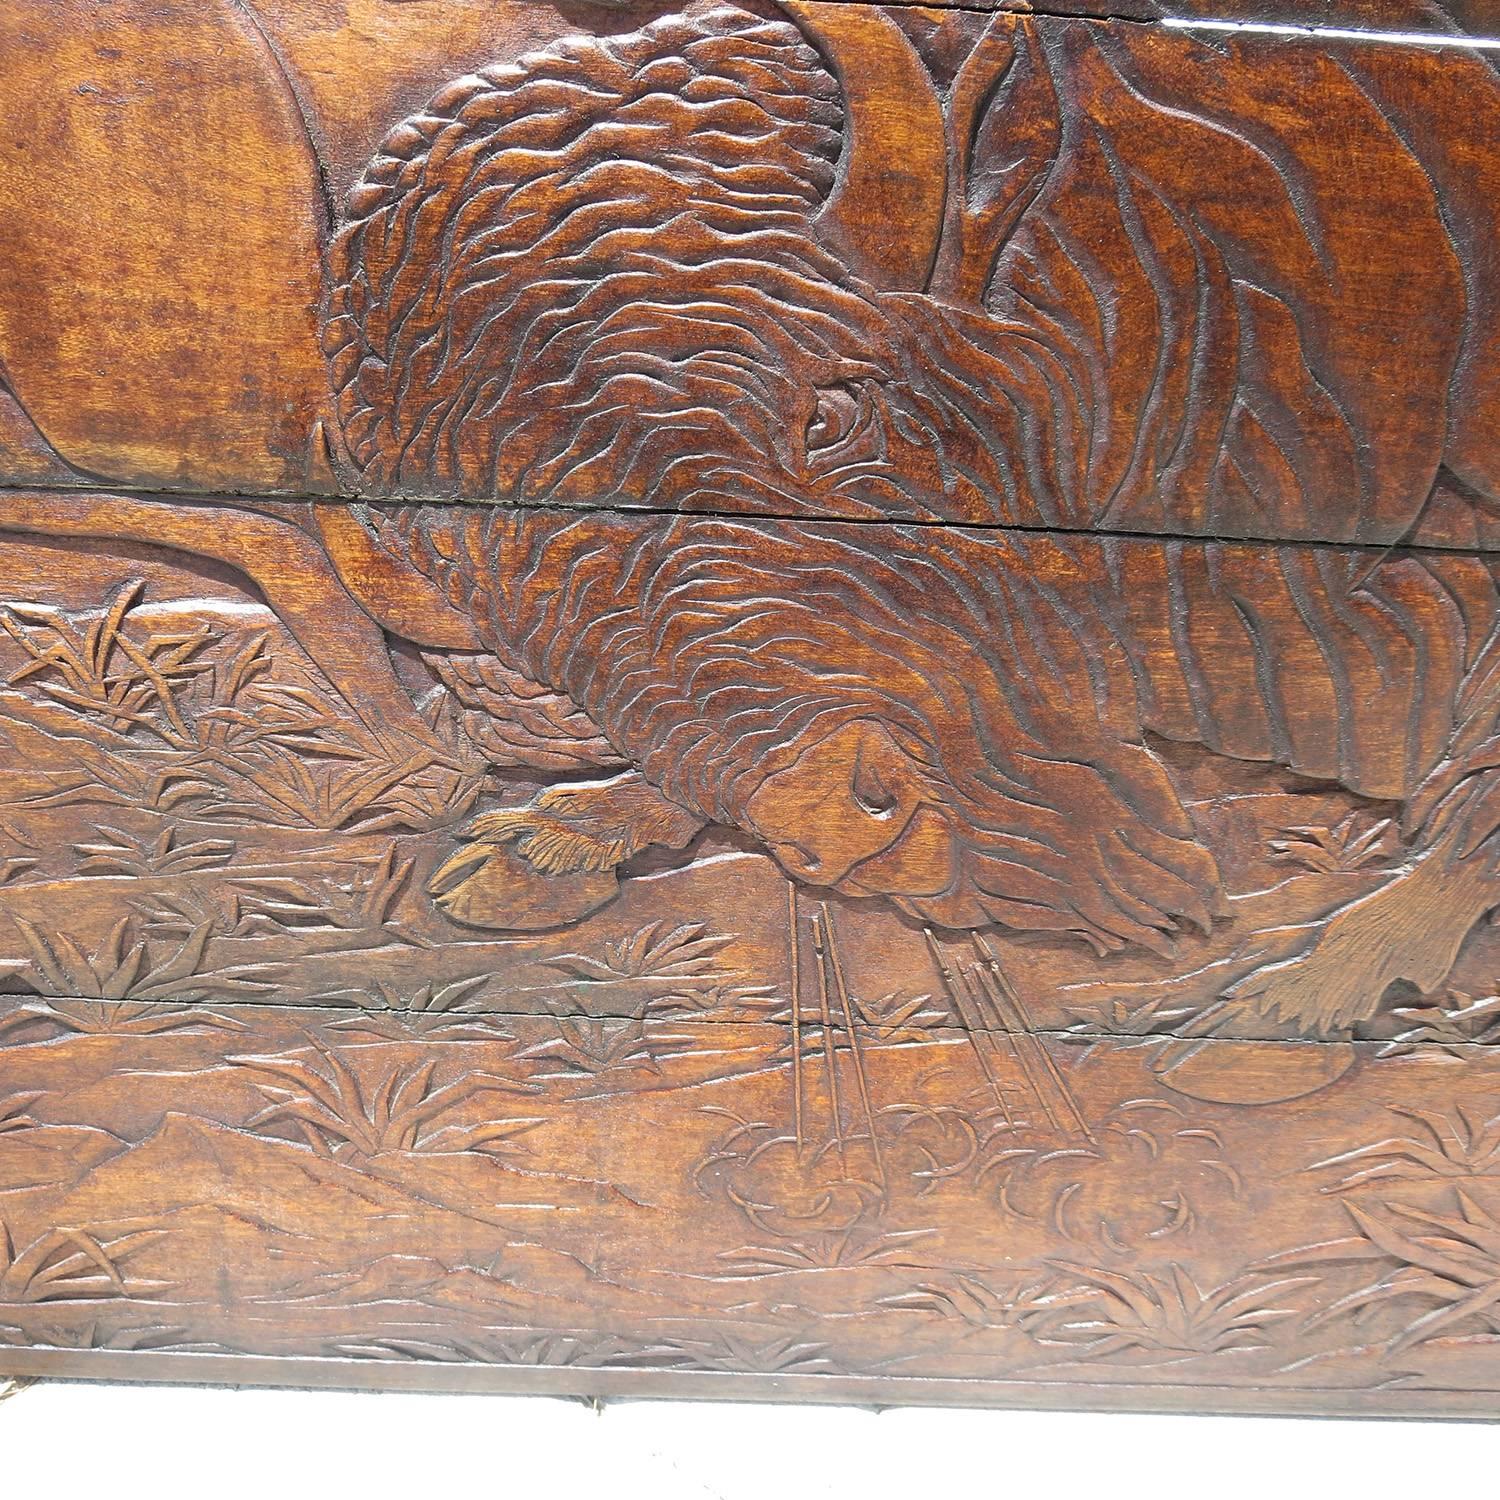 Hand-Carved Native Hunting Buffalo Carved Wooden Wall Panel Art by Leanora Oliver Nunn